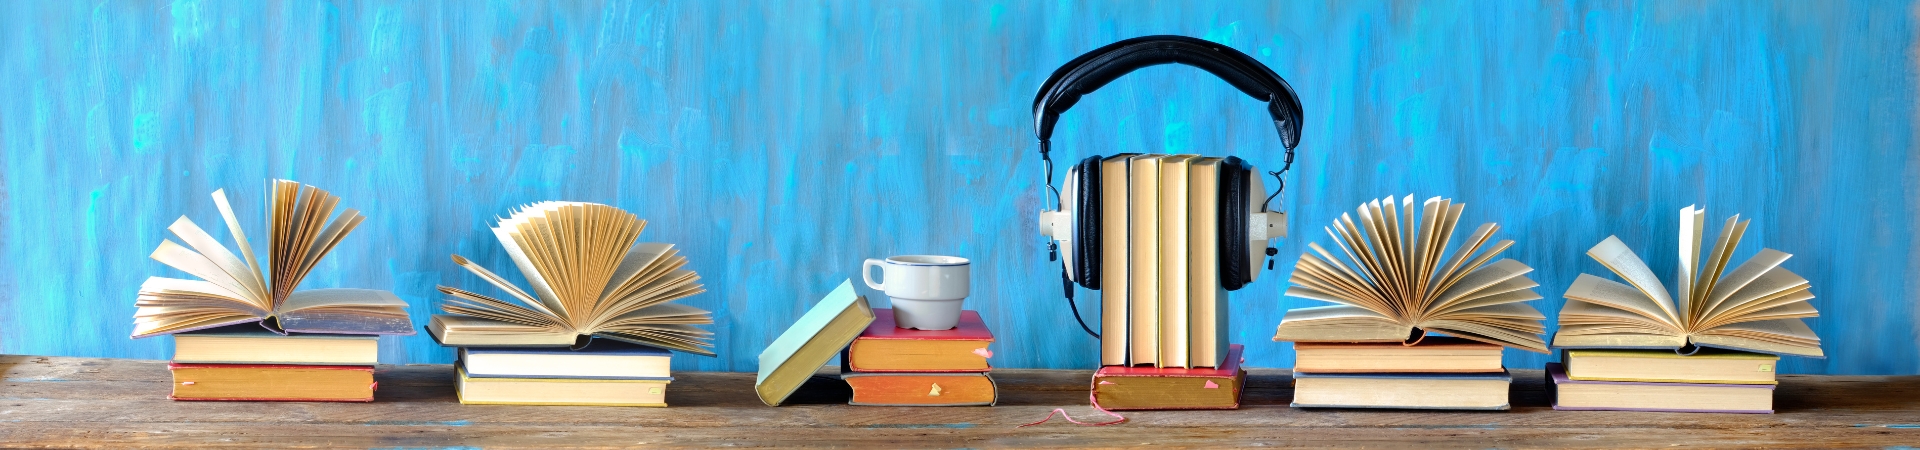 A row of books lined up in front of a blue background. One book has headphones perched on top.